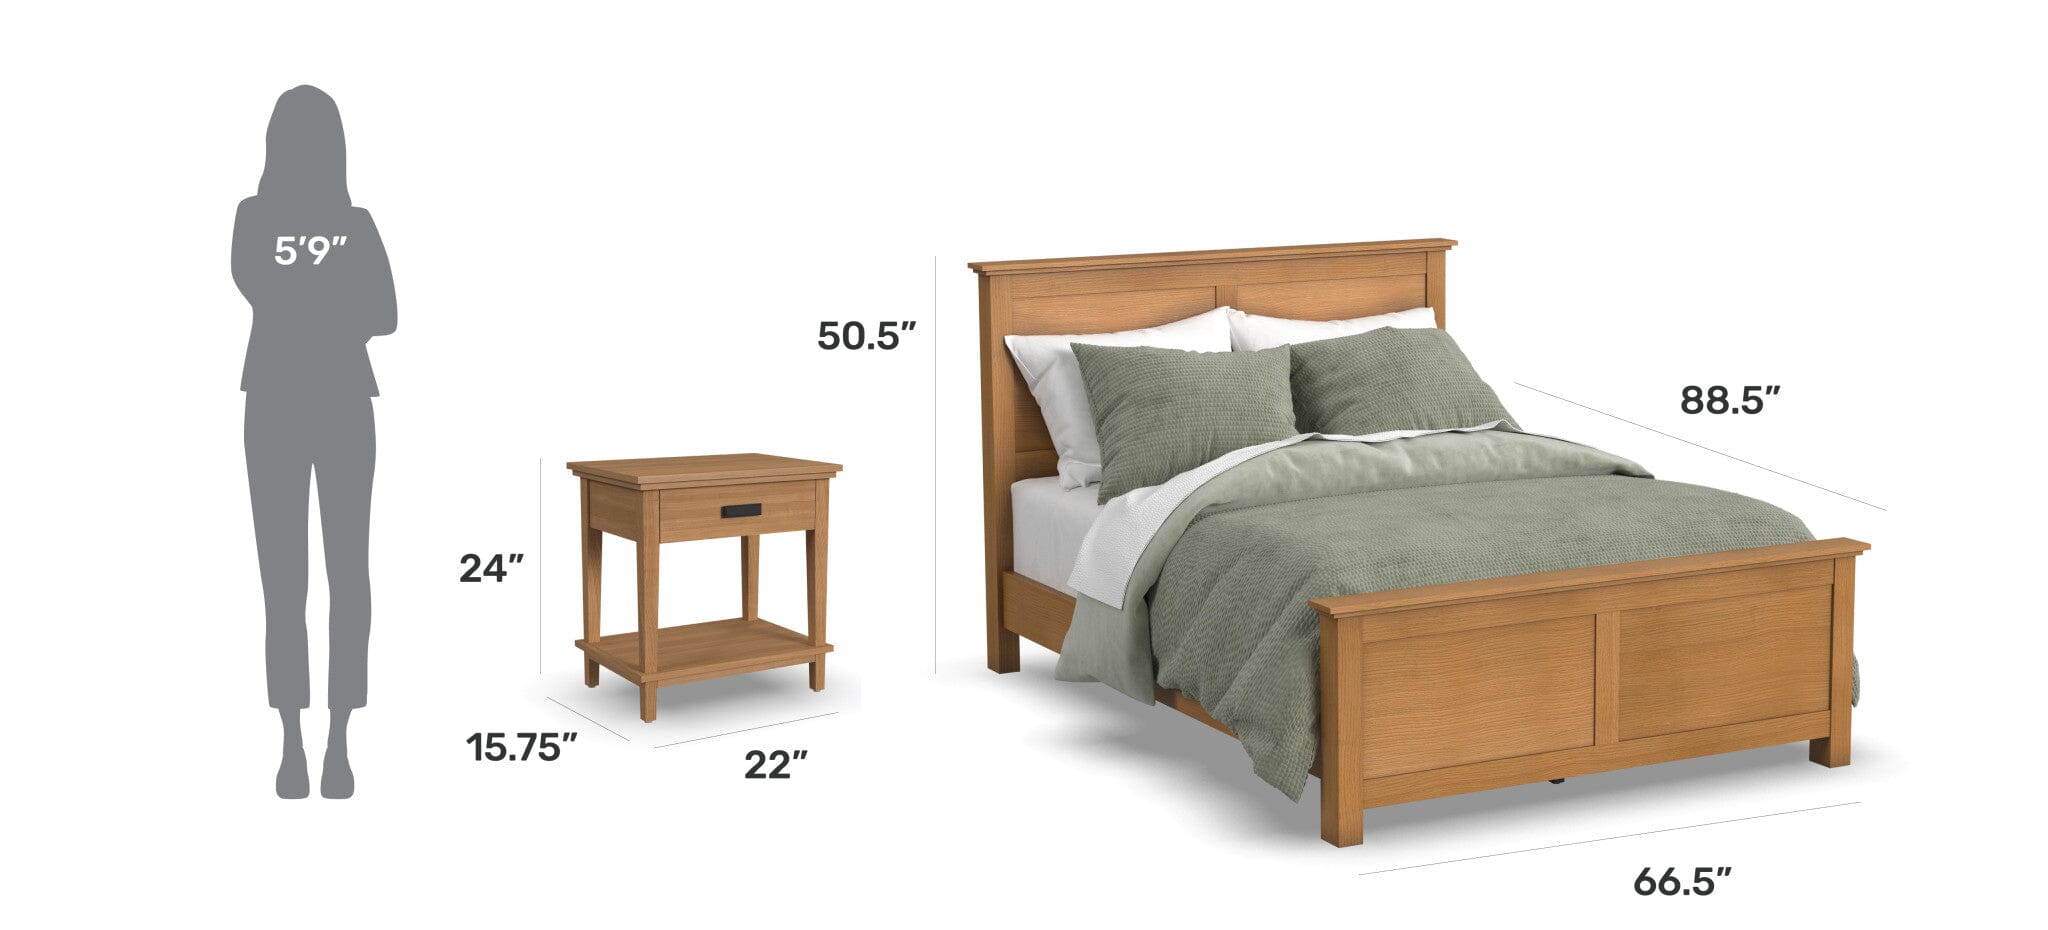 Traditional Queen Bed and Nightstand By Oak Park Queen Bed Oak Park